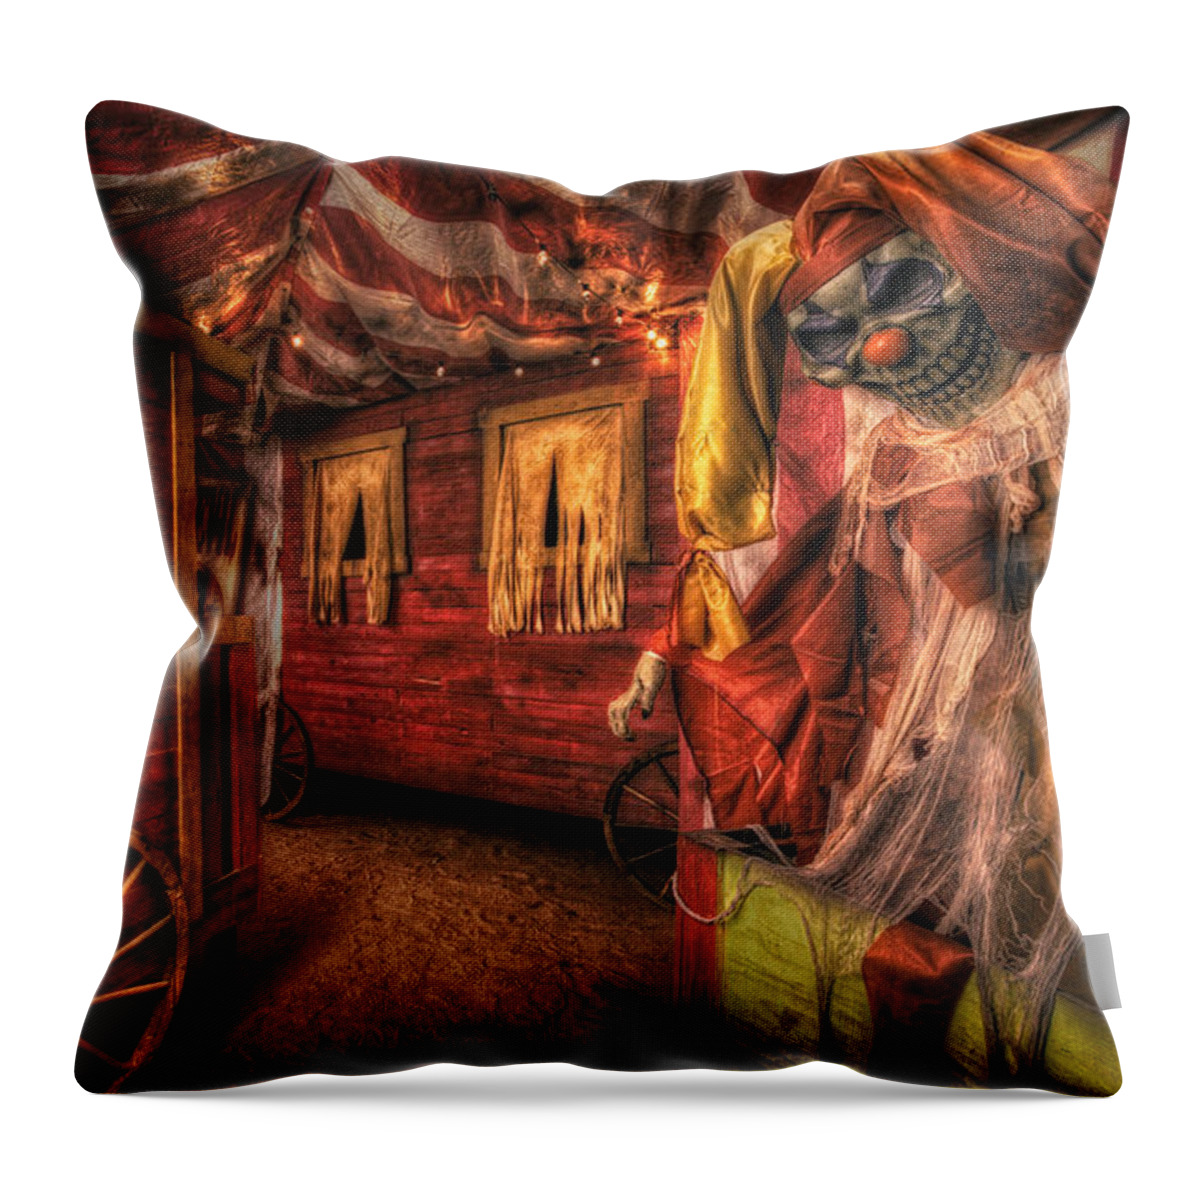 Haunted Throw Pillow featuring the photograph Haunted Circus by Daniel George